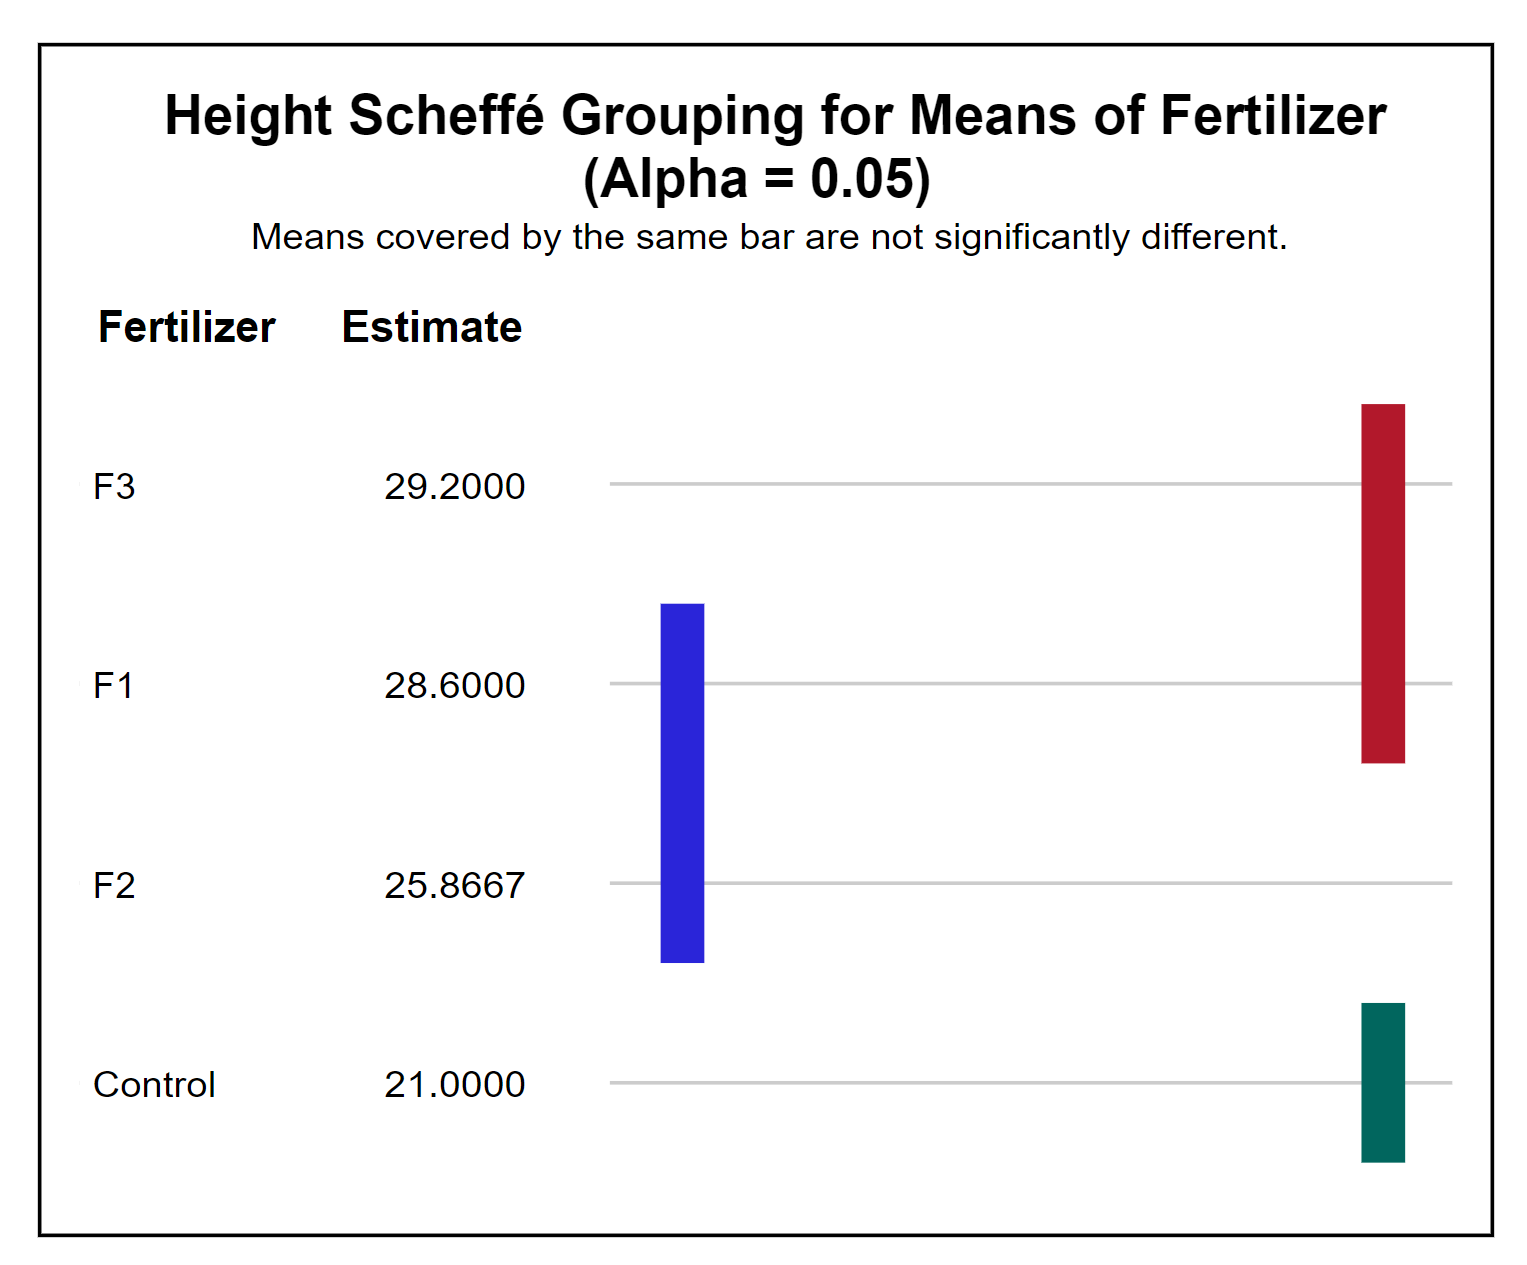 Scheffé height grouping for fertilizer treatment means. F3 and F1 are covered witha  single red bar, F1 and F2 are covered with a single blue bar, and Control is covered with a green bar.